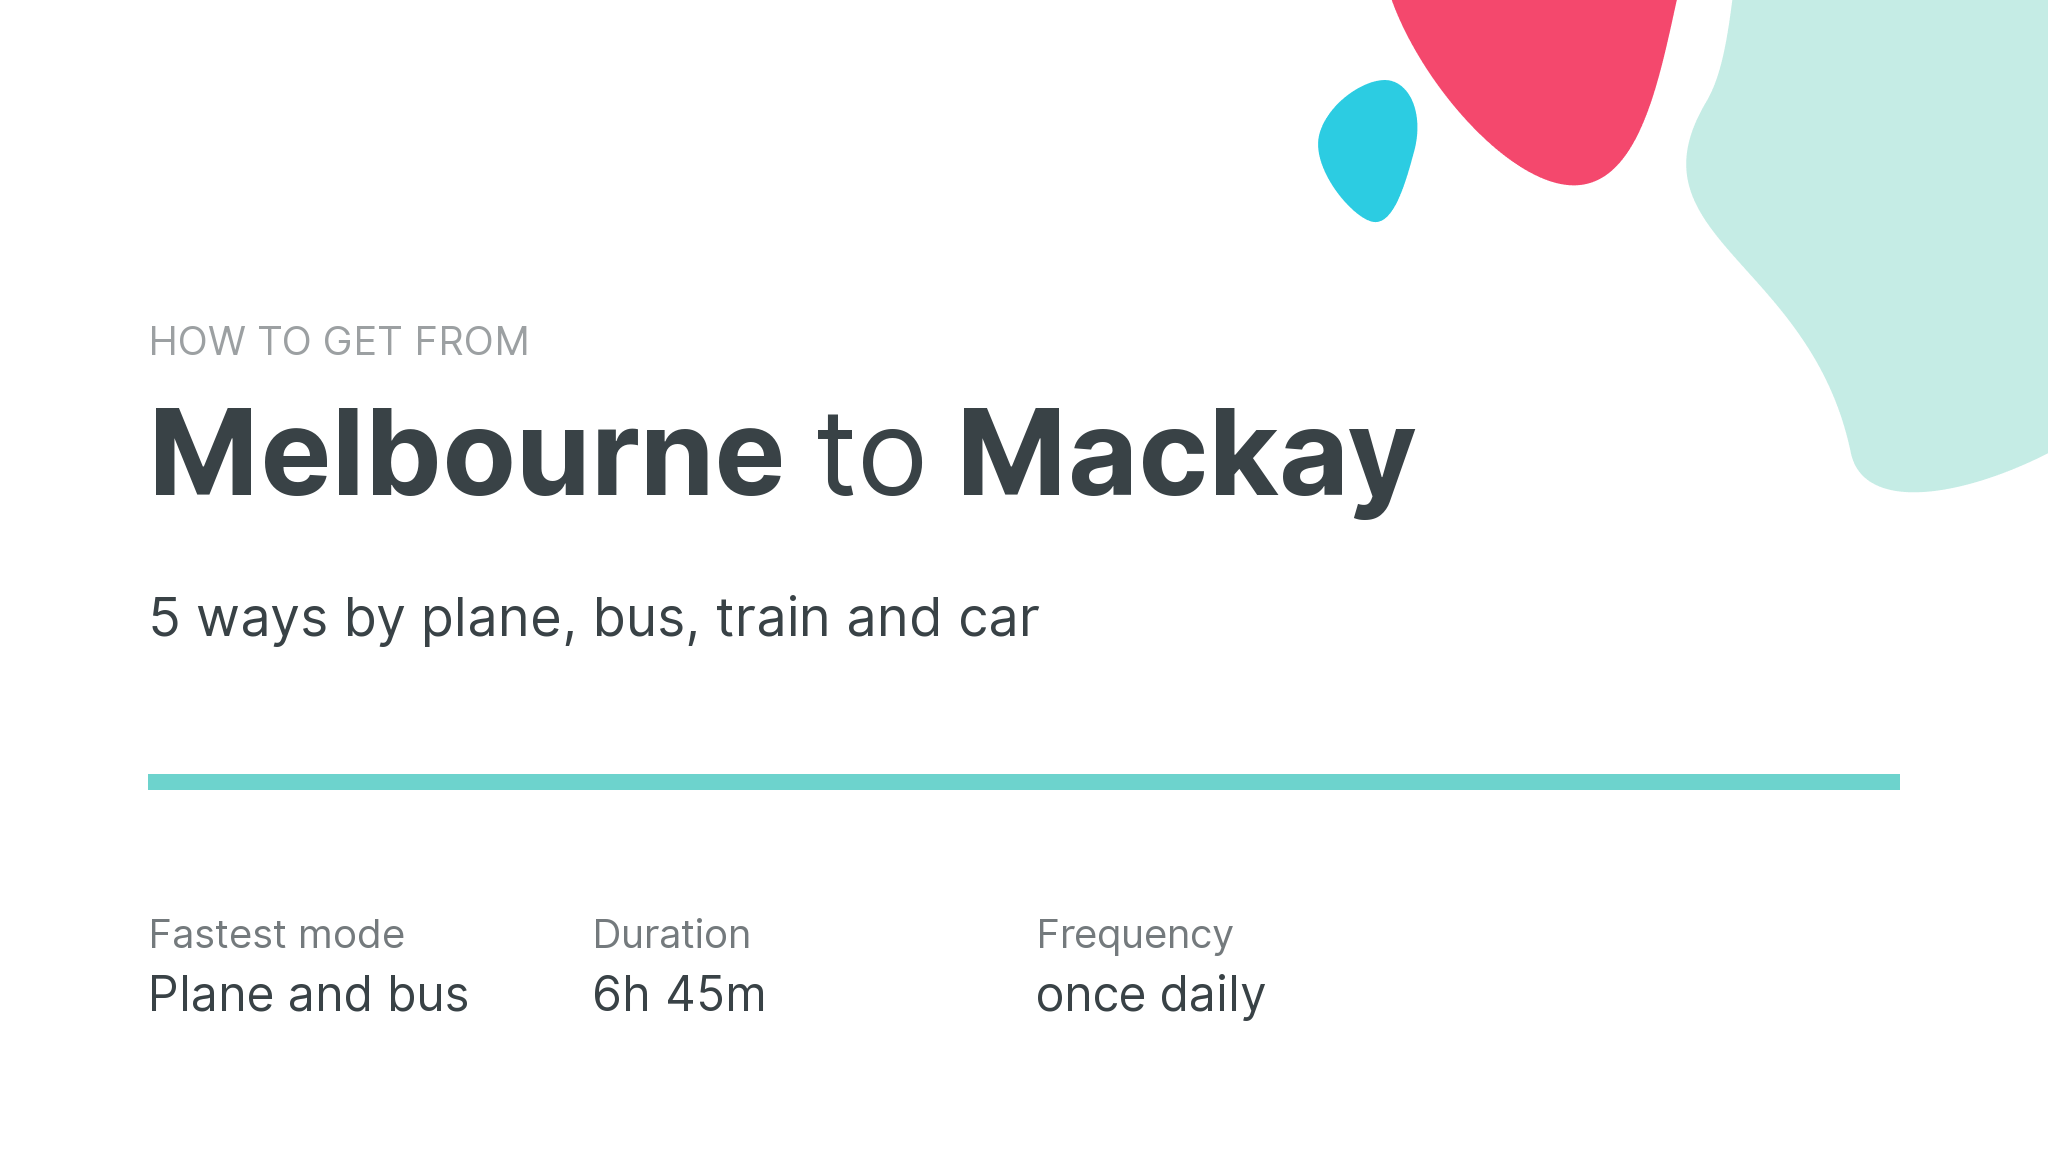 How do I get from Melbourne to Mackay